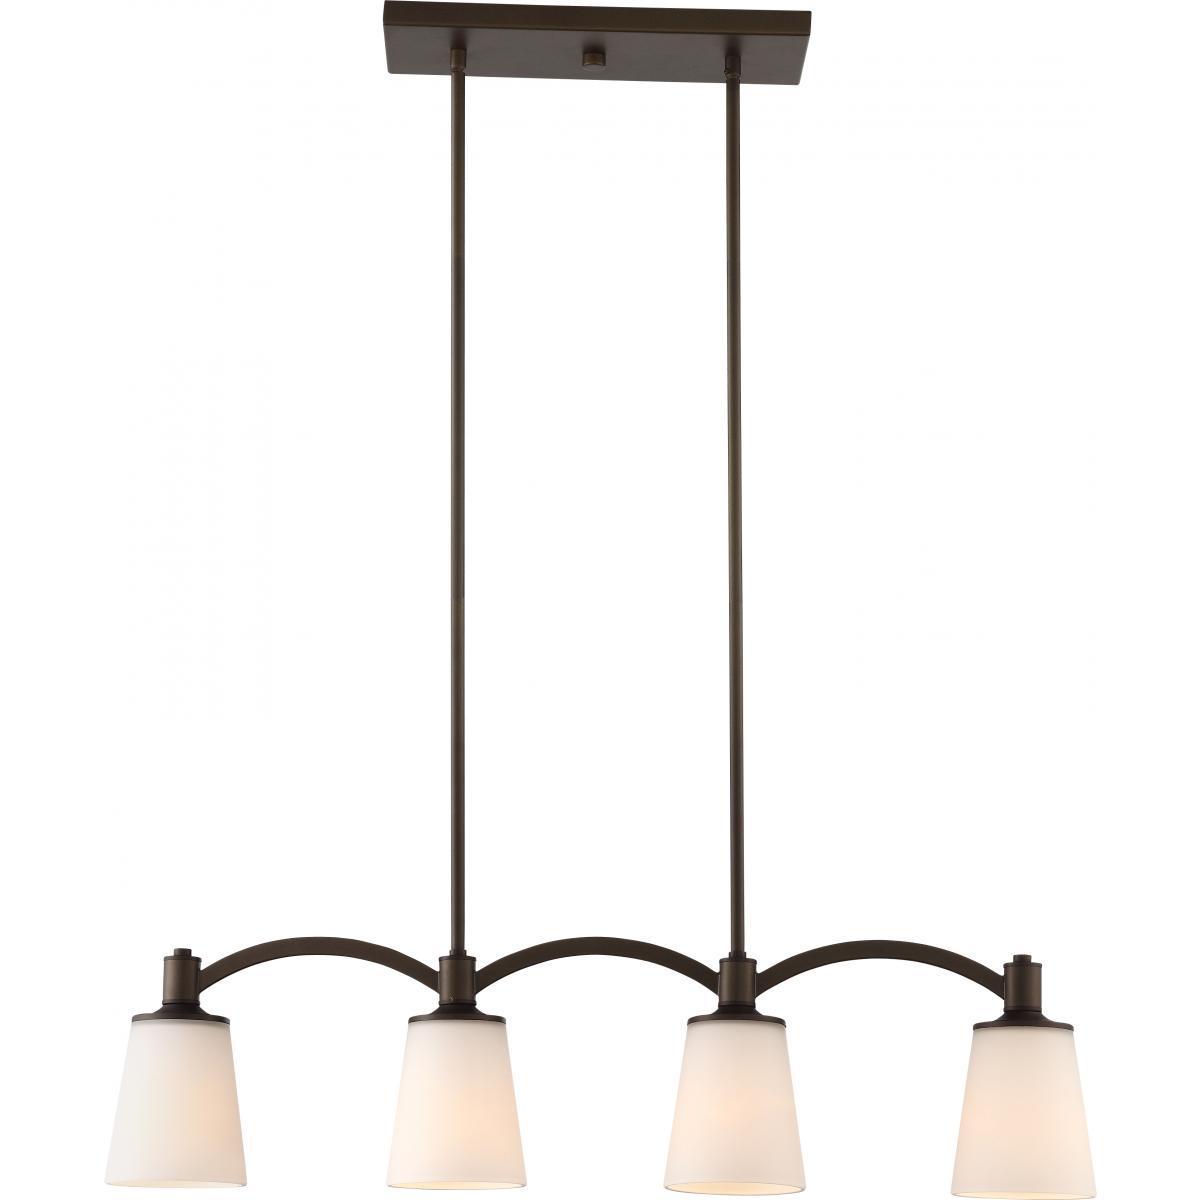 Laguna 4 Light Island Pendant Forest Bronze with White Glass Ceiling Nuvo Lighting 